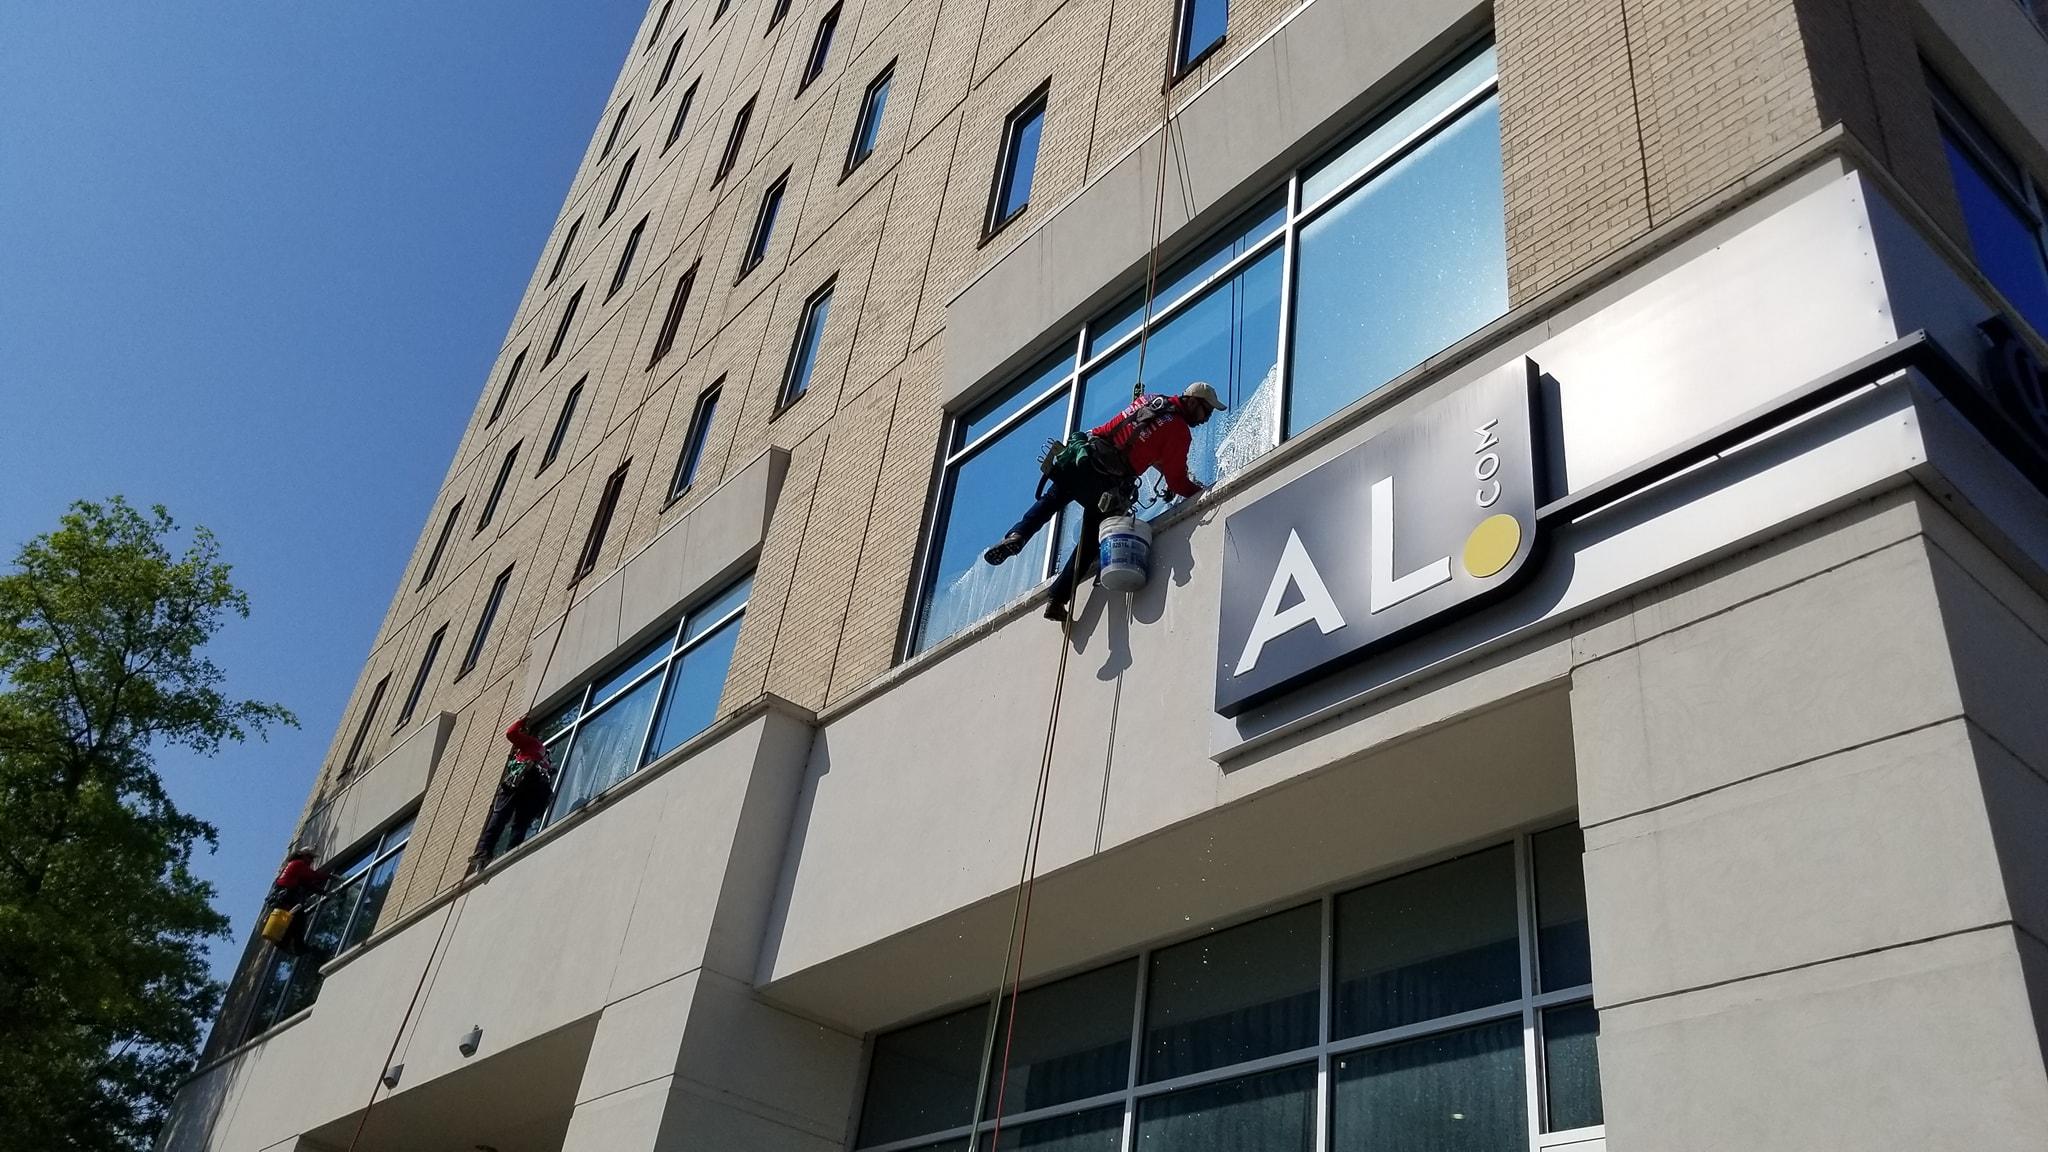 Window Cleaning & Pressure Washing company Sunlight Building Services in Birmingham, AL